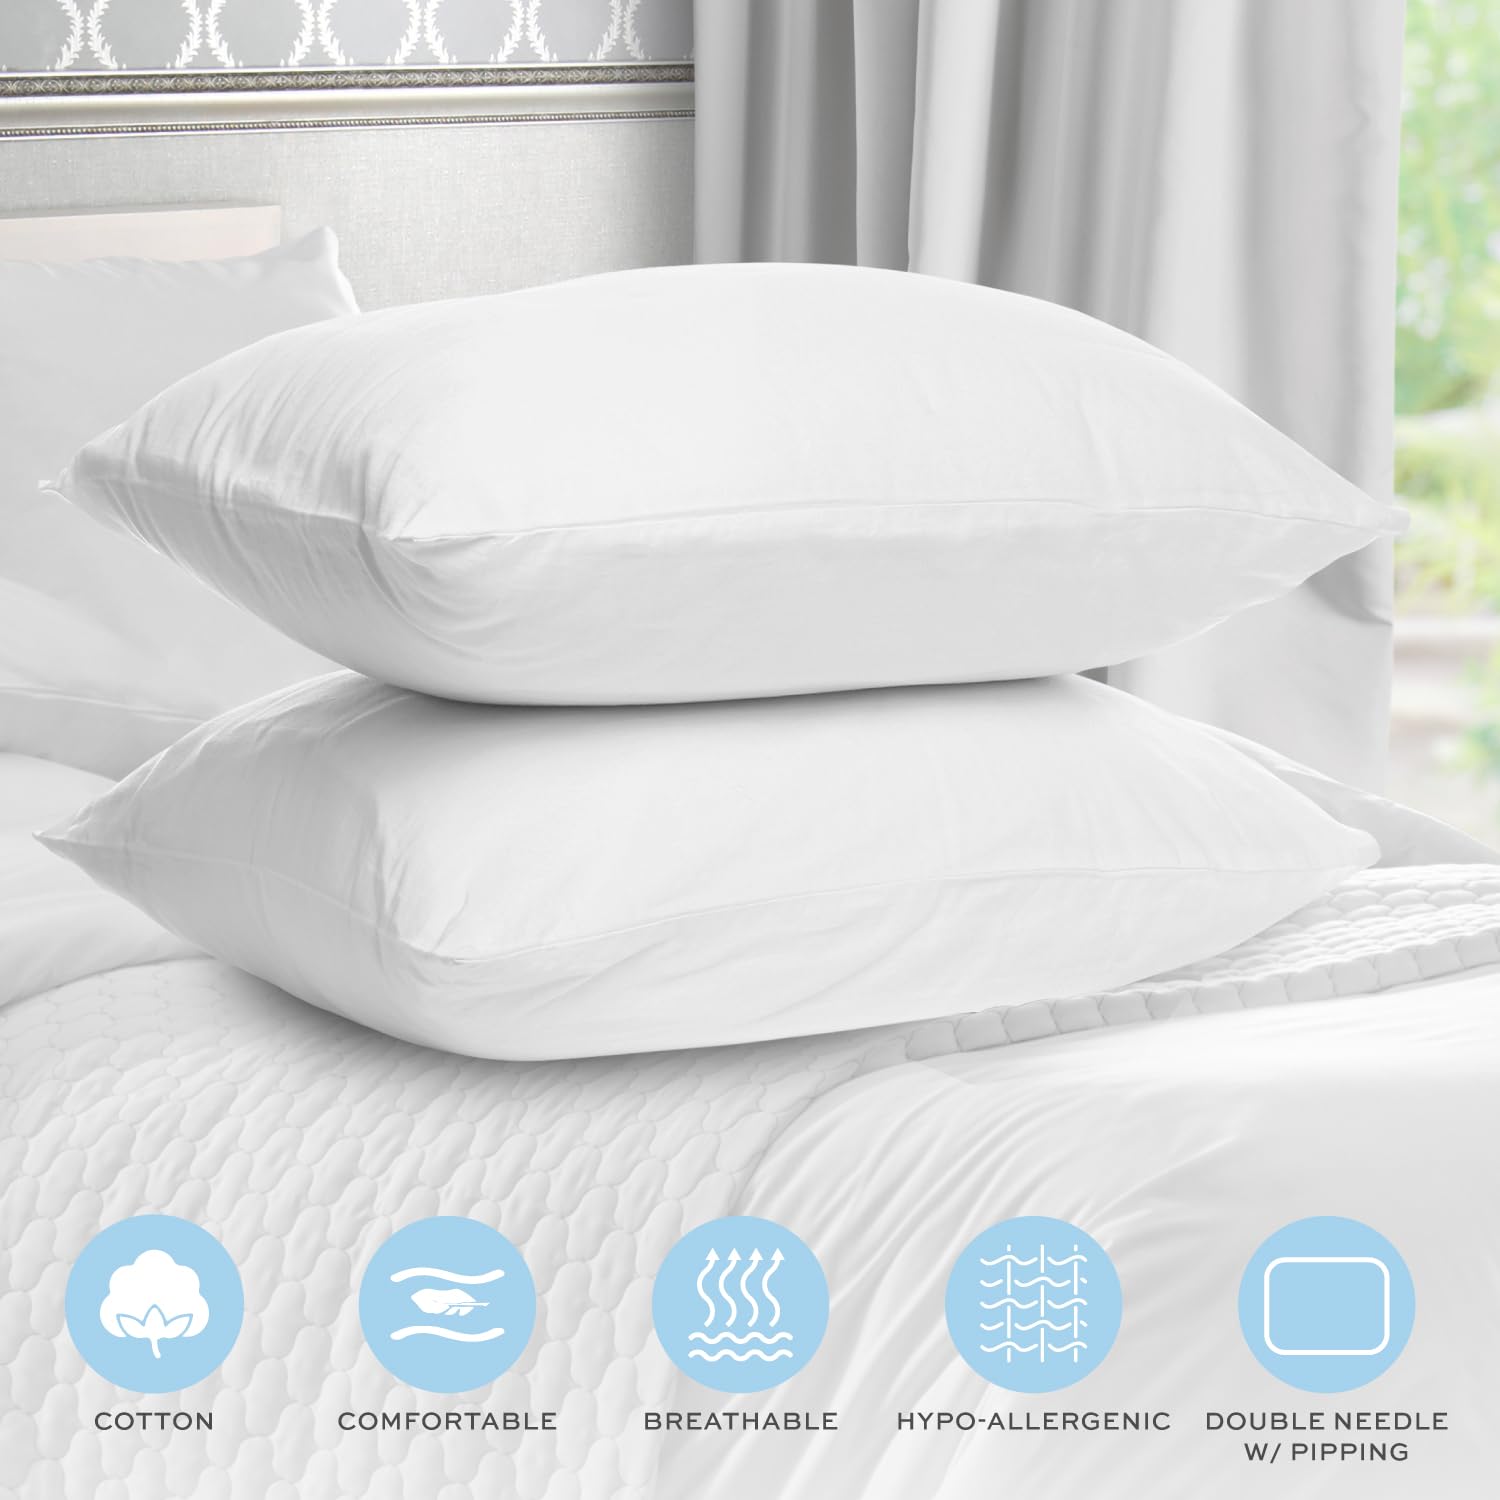 White Classic Bed Pillows for Sleeping 2 Pack, King Size Pillow Side Sleeper Set, Down Alternative Luxury Hotel Soft Pillow 20x36 Inches  - Very Good